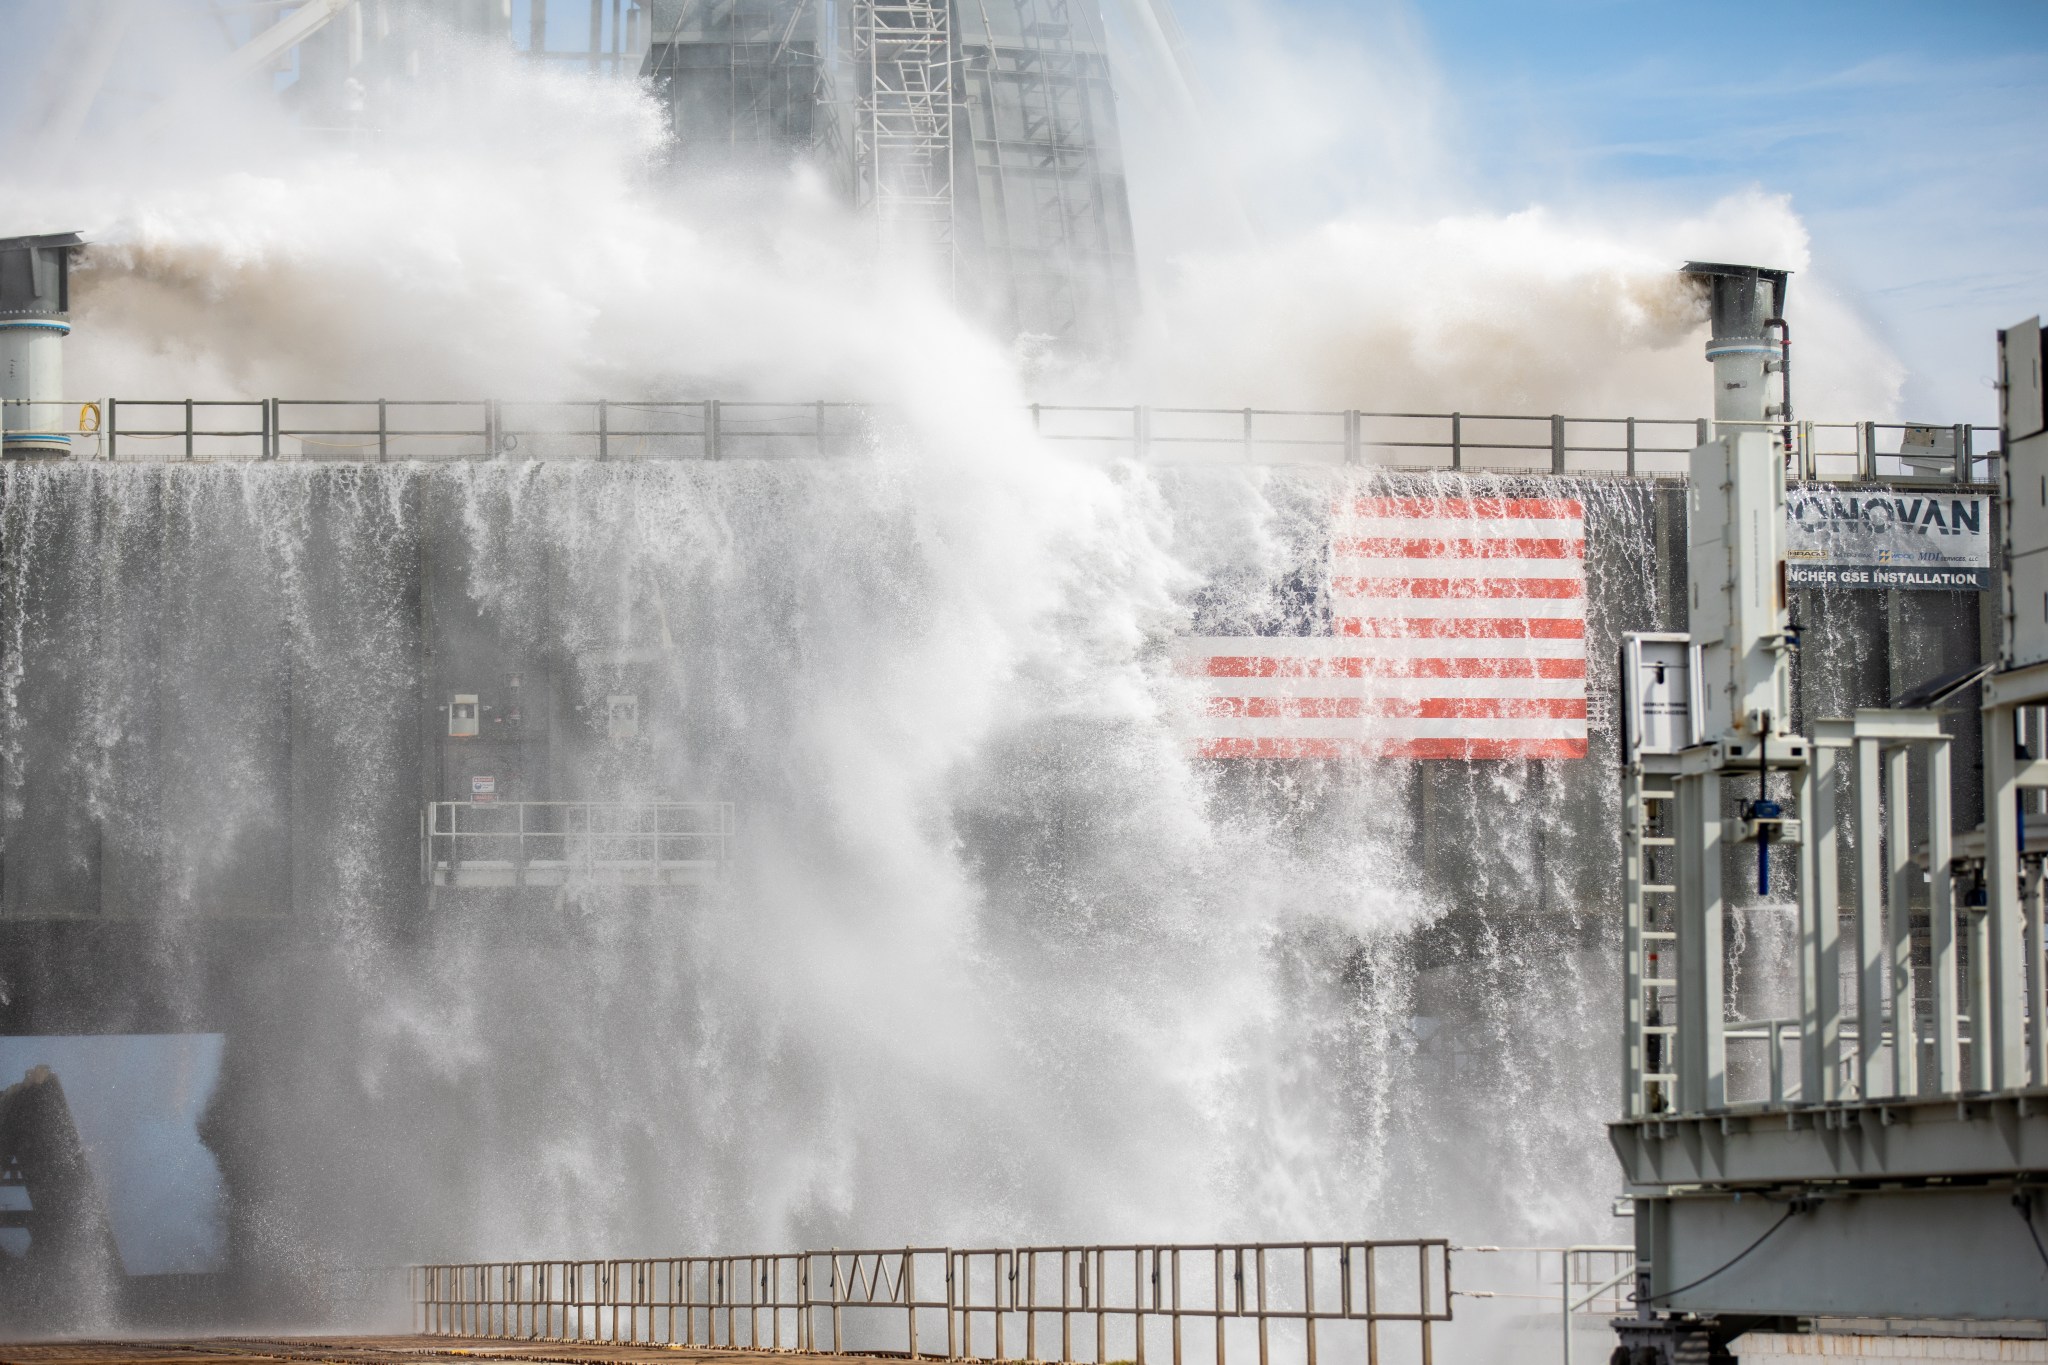 NASA eclipsed a milestone with its latest successful water flow test on the mobile launcher.